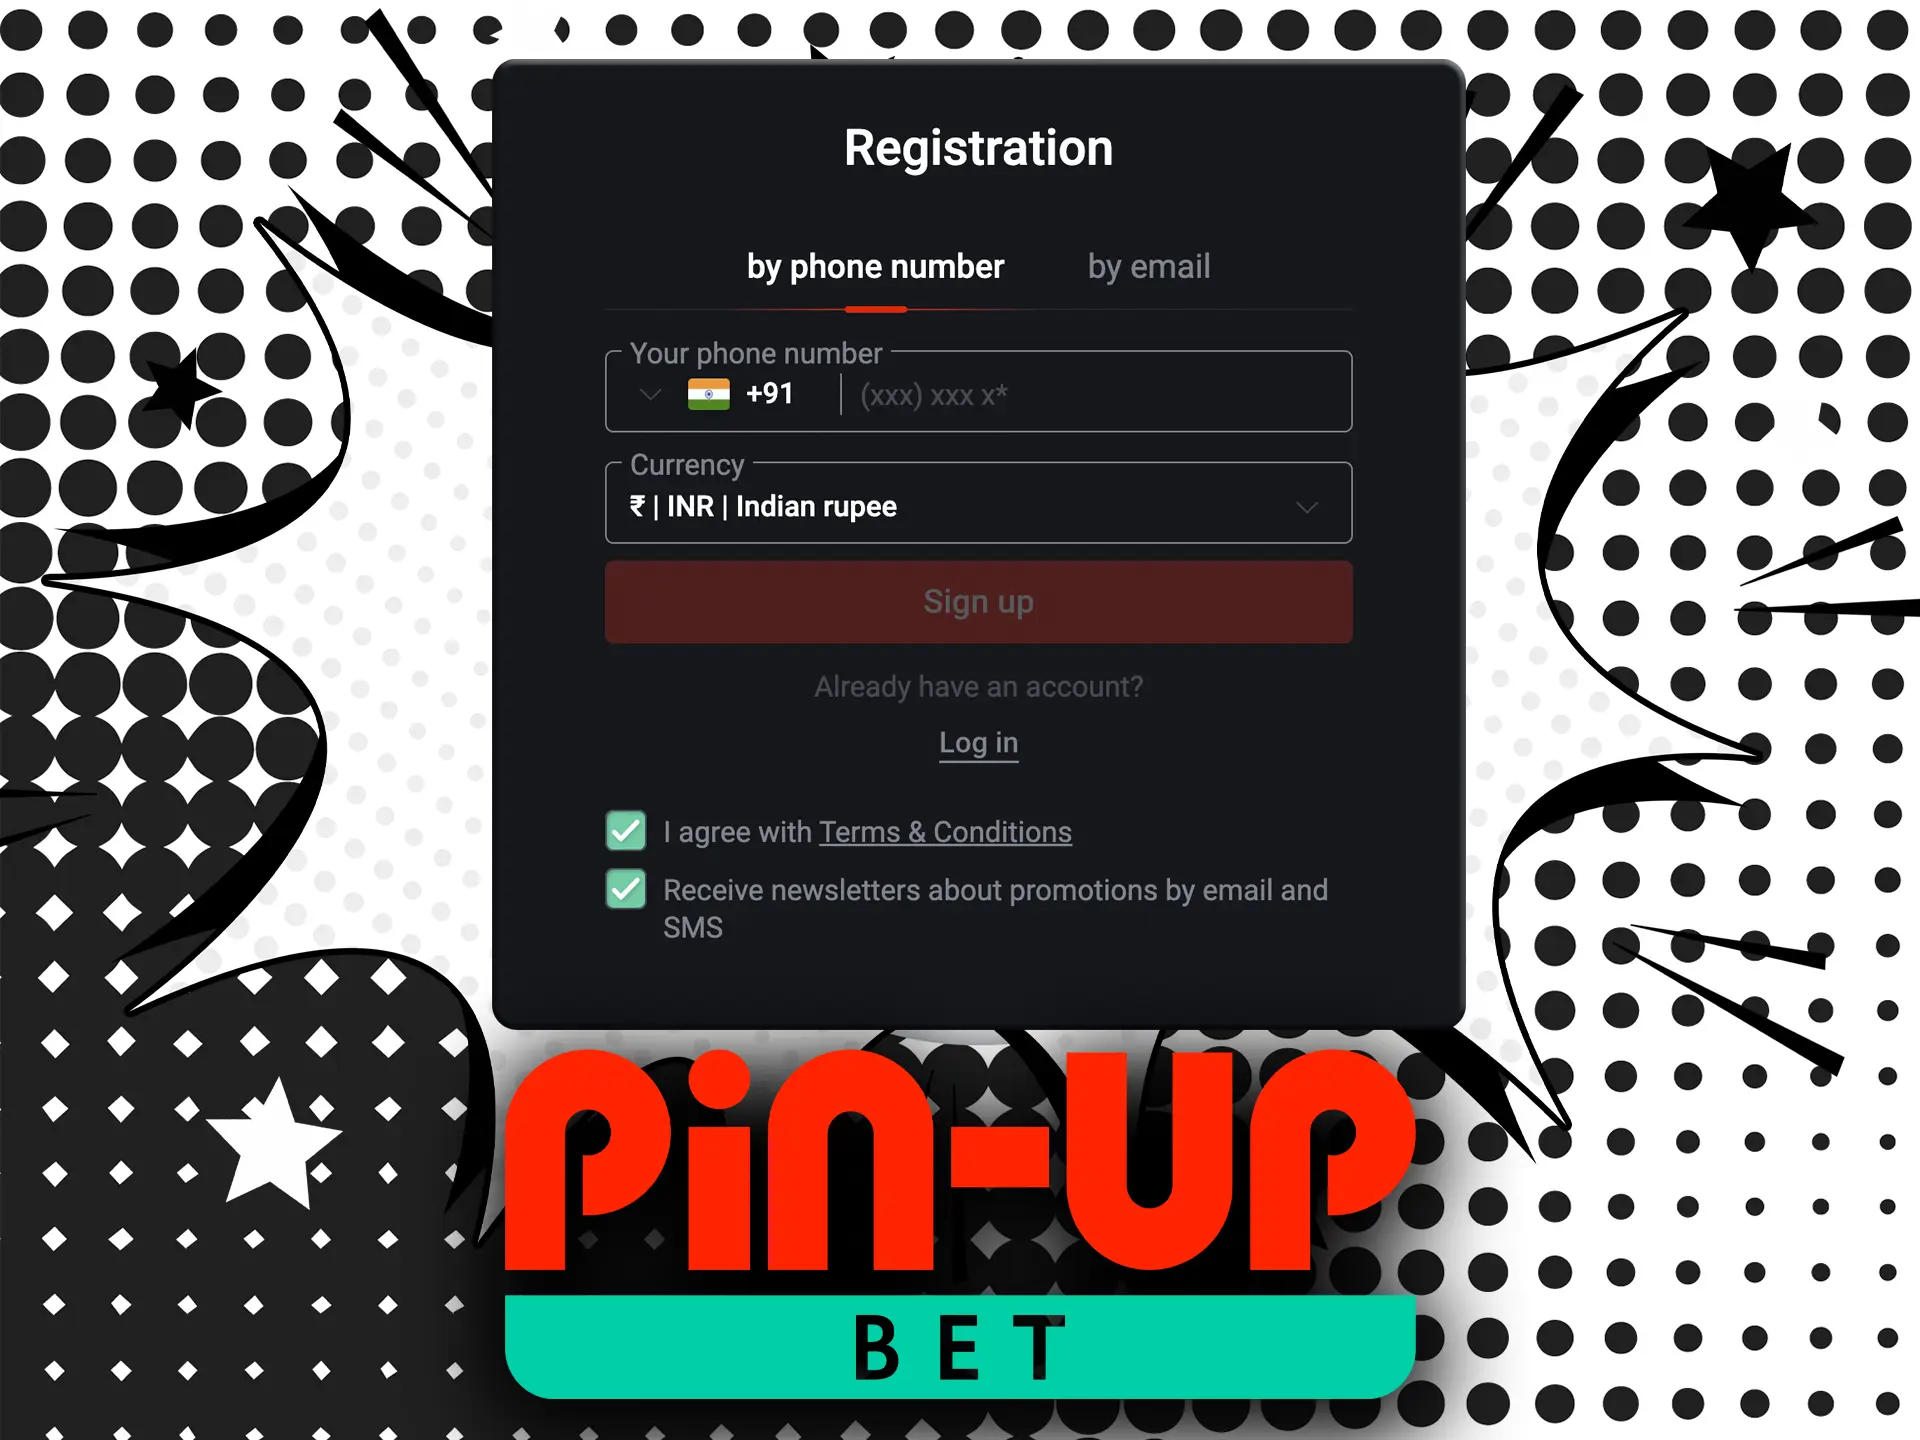 You can register in Pin Up with the help of your phone number or email.